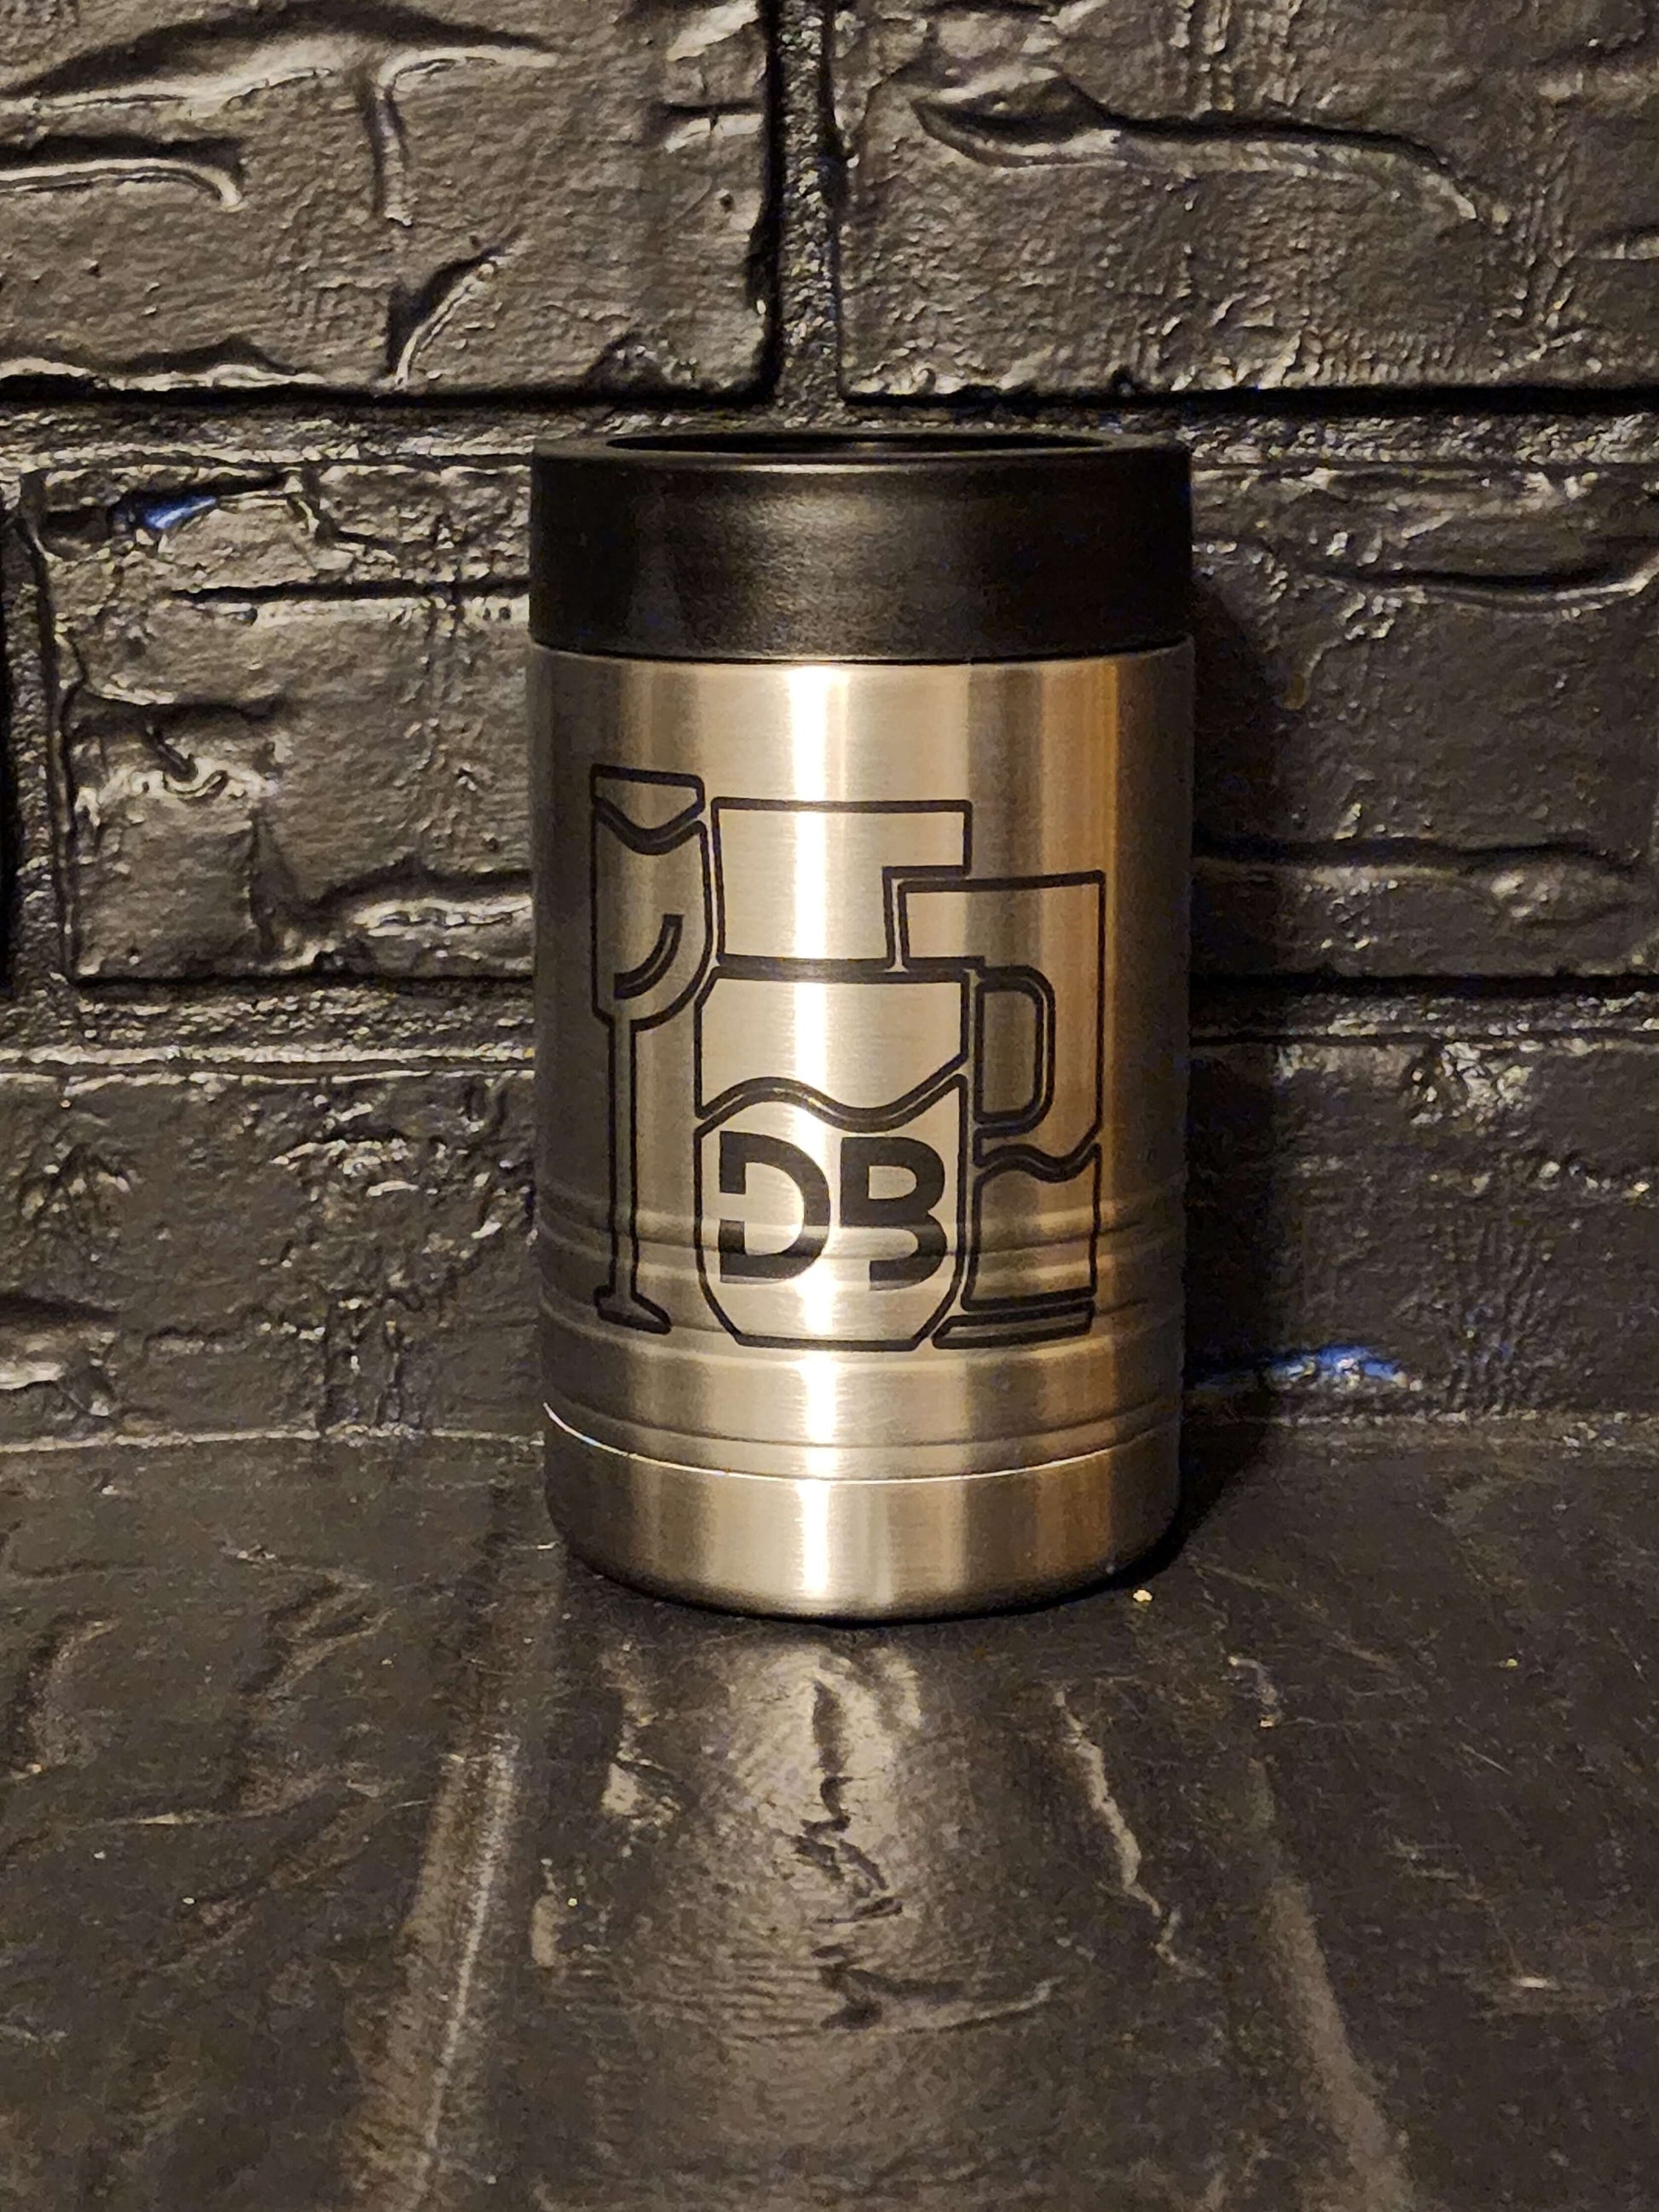 4 in 1 Personalized Stainless Steel Can Cooler, Double Wall Insulated,  Custom Bottle Holder, Engraved Cooler, Drink Can Holder. 